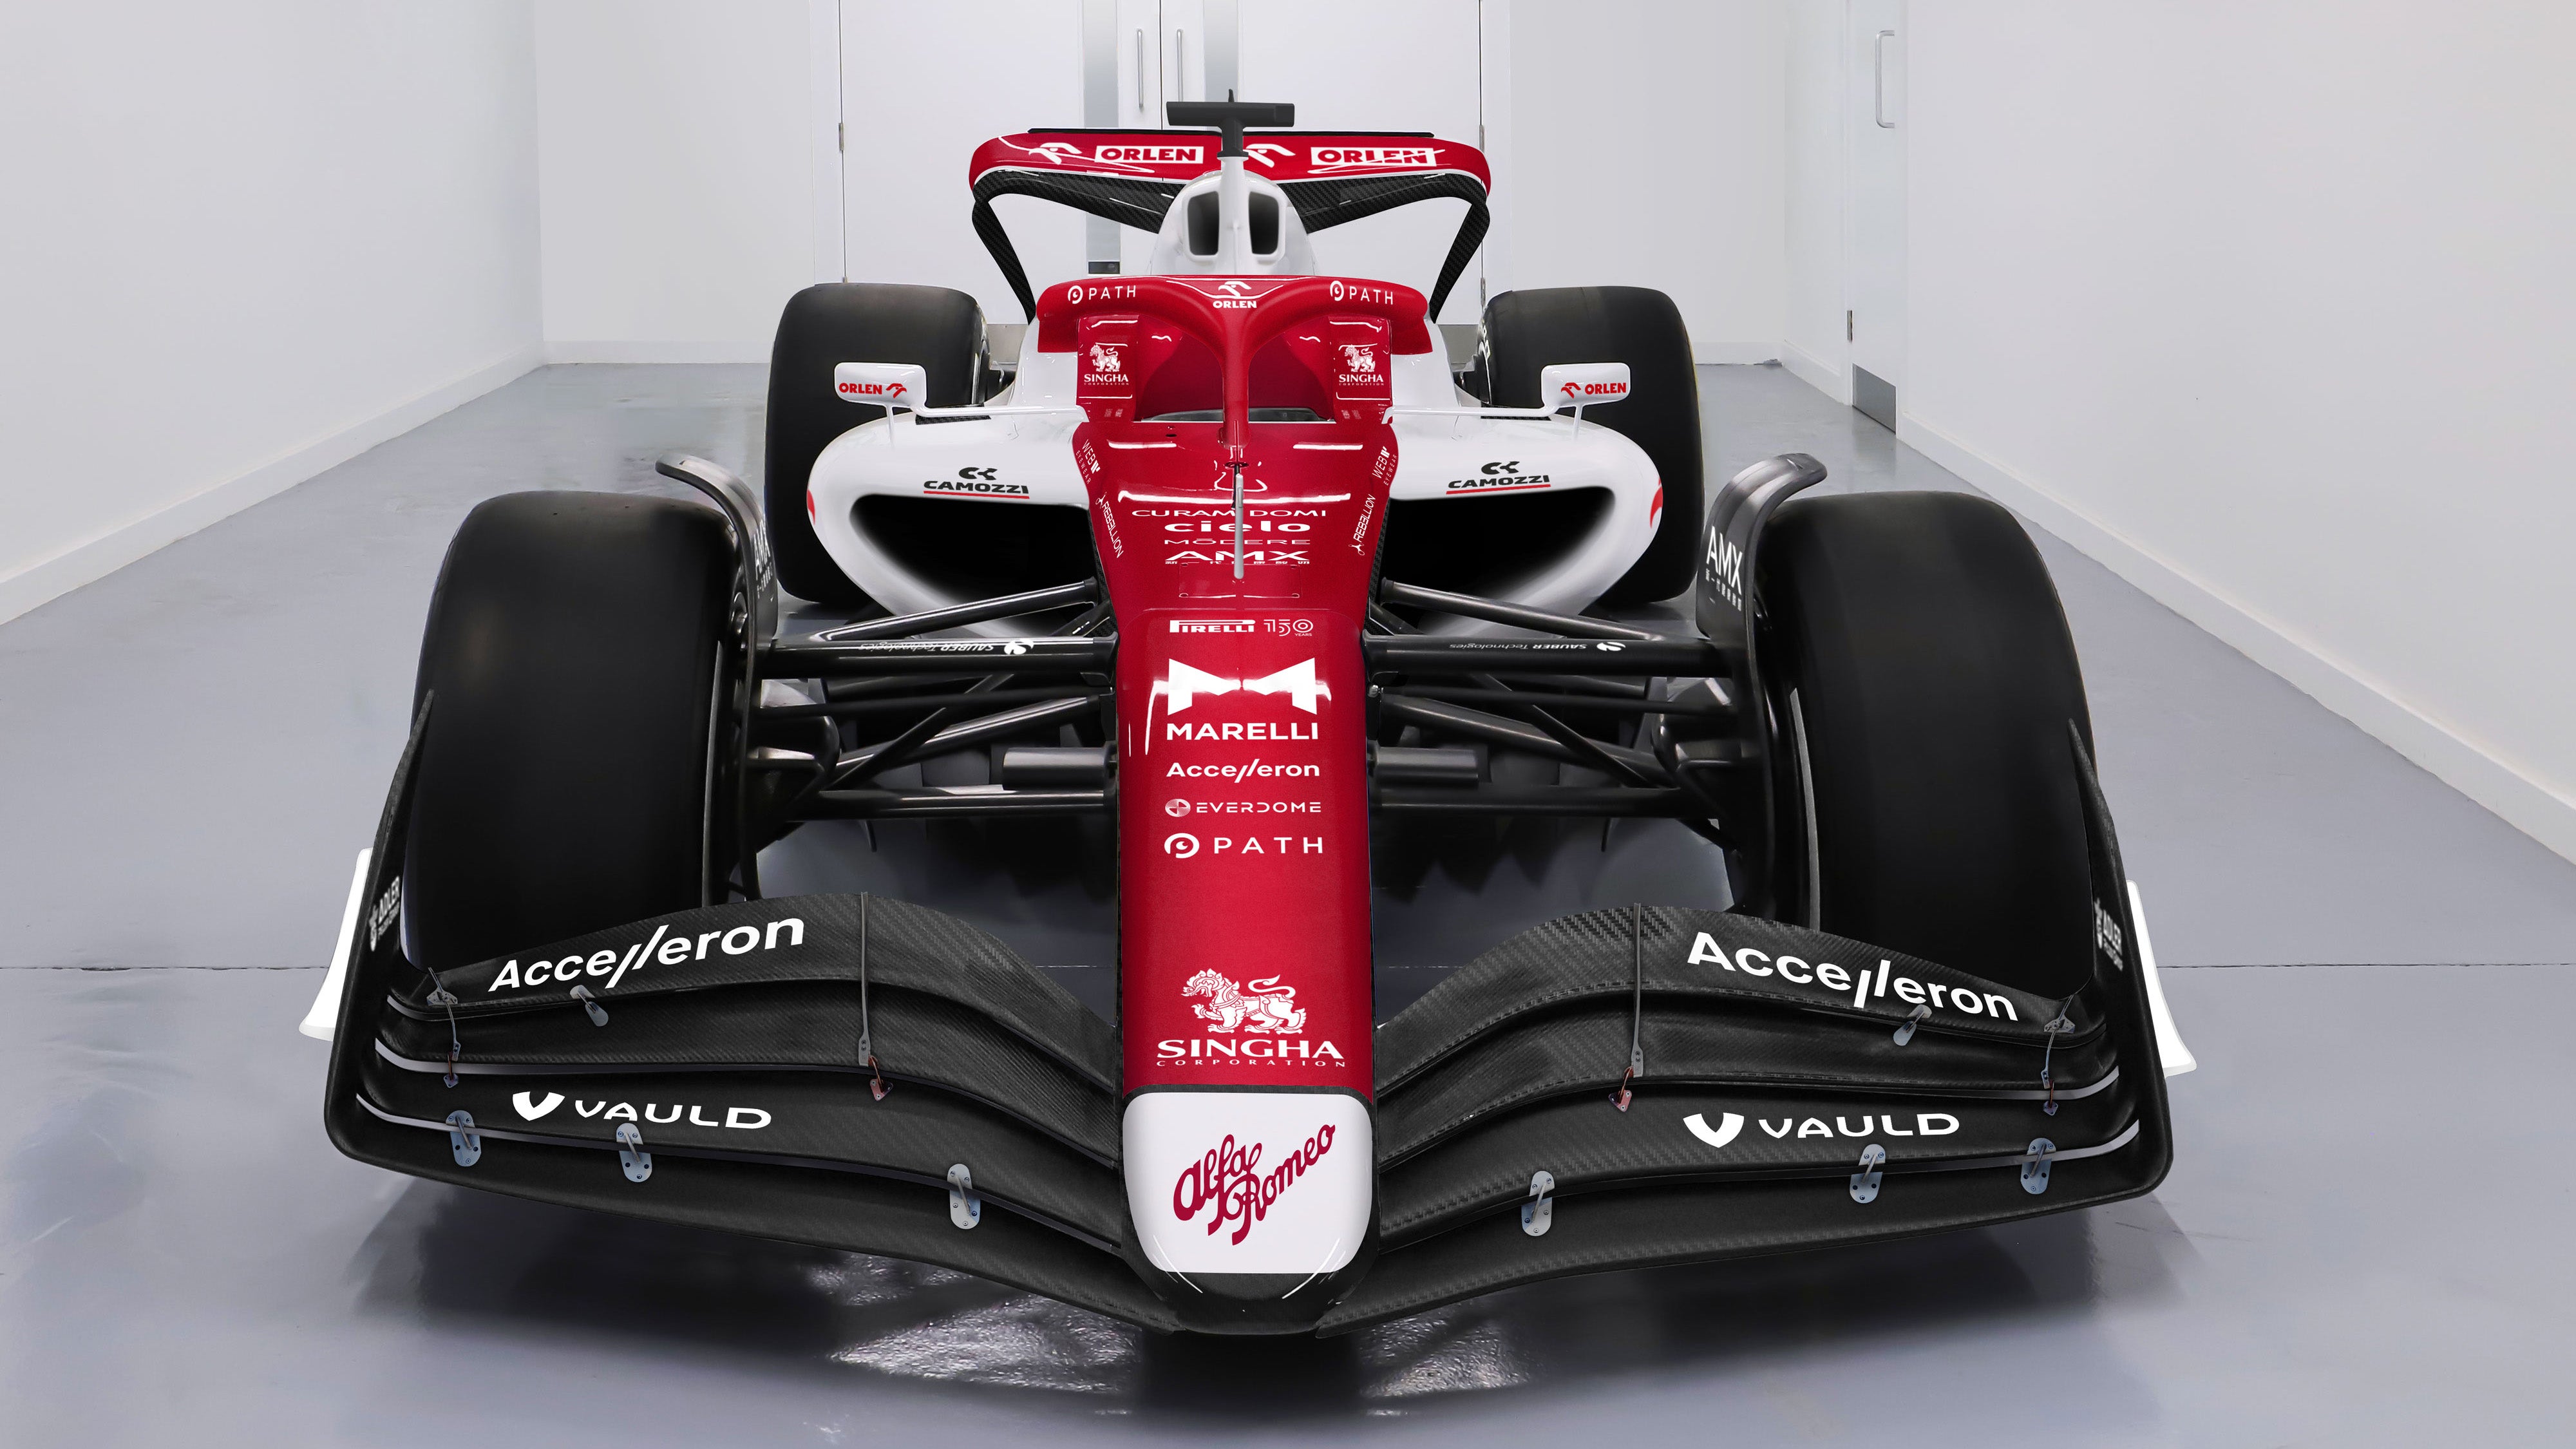 THE MEMENTO GROUP LAUNCHES FIRST 2022 F1® SHOW CAR IN PARTNERSHIP WITH